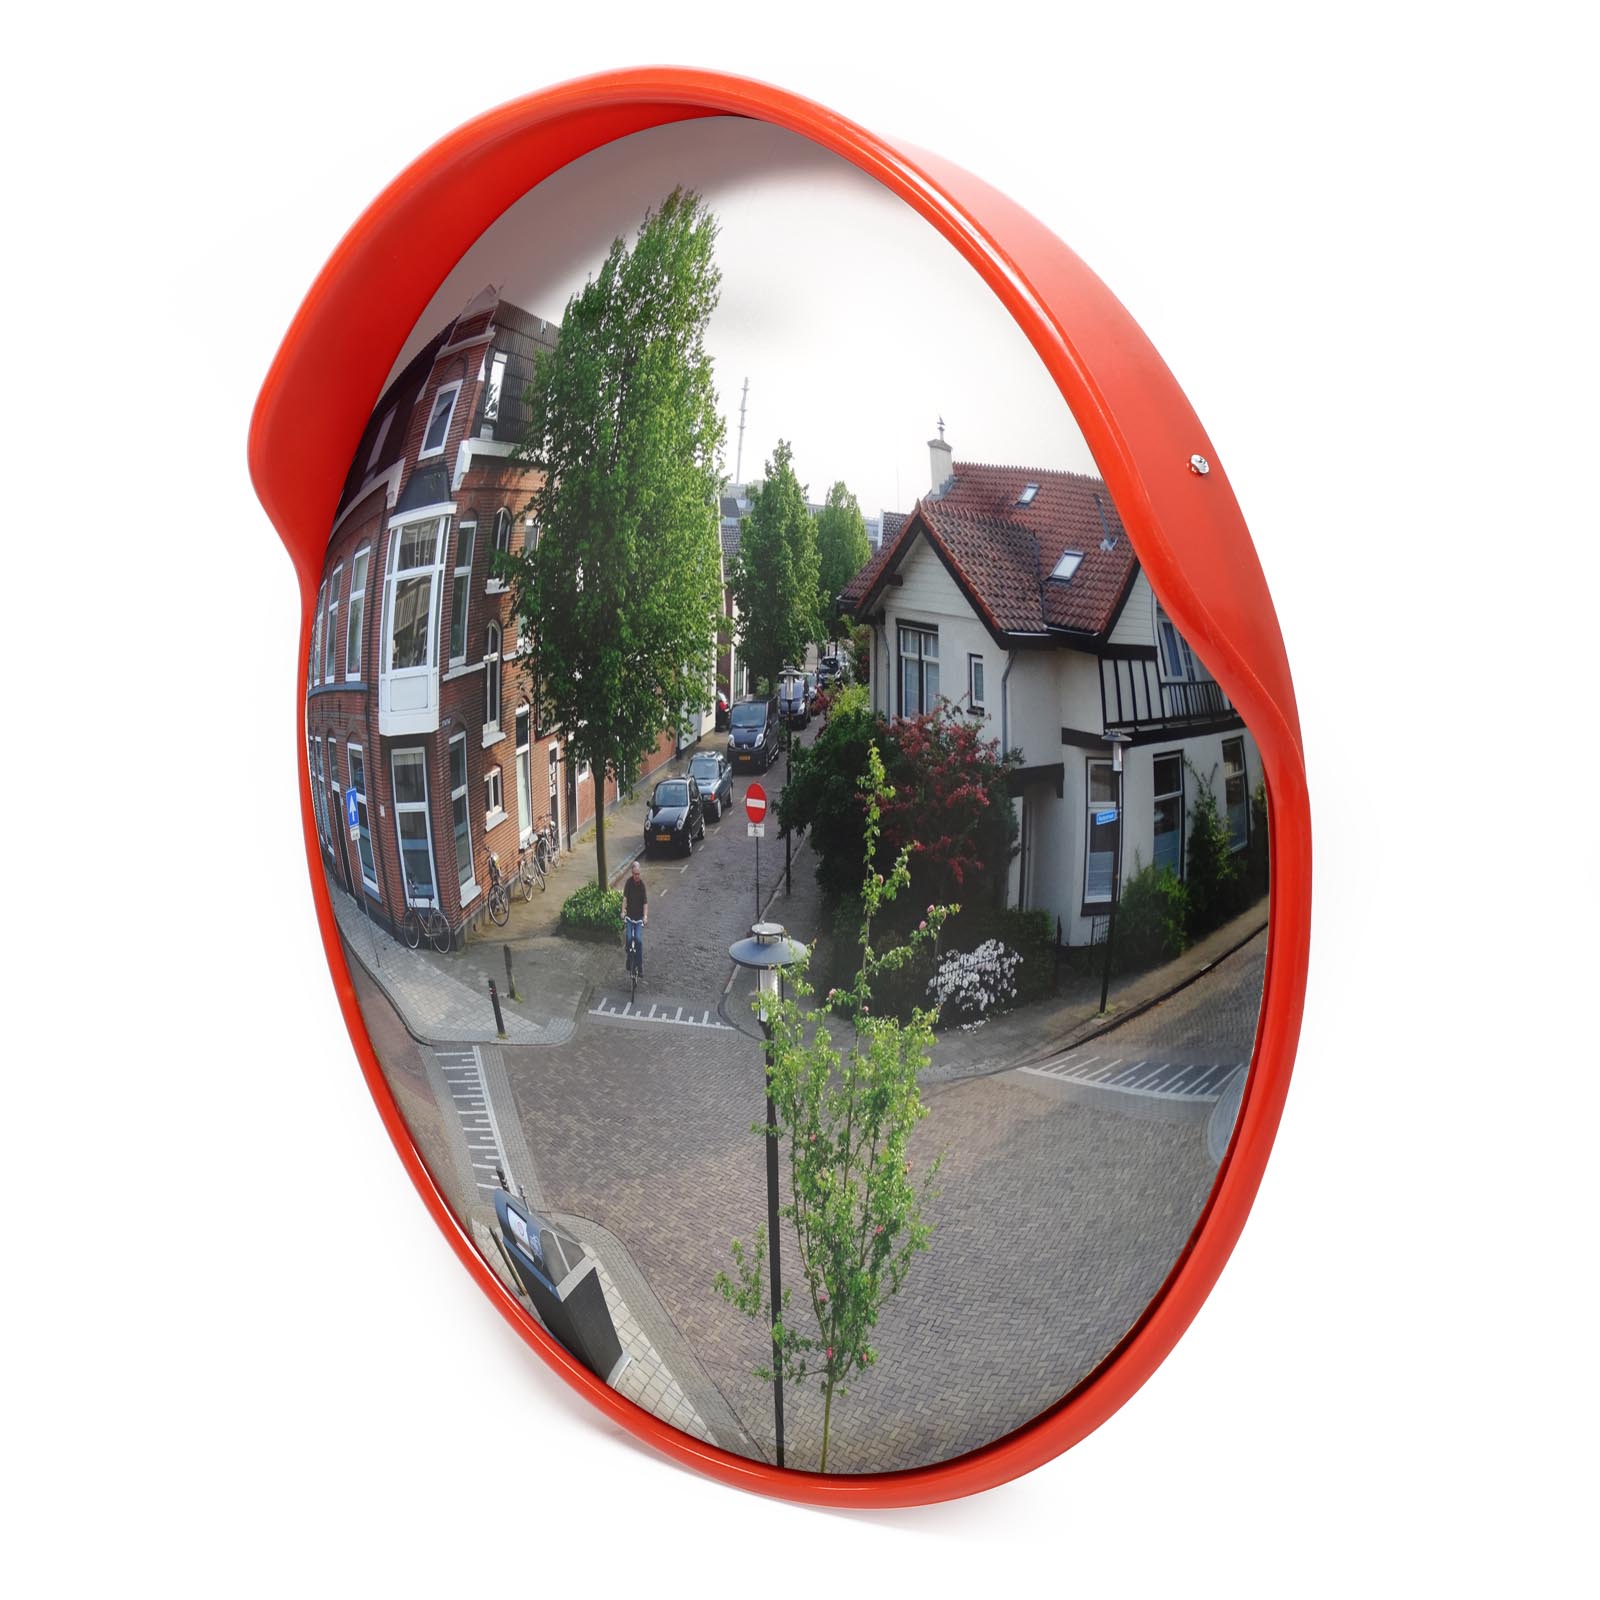 Security Mirror convex Road Safety Driveway Wide Angle View